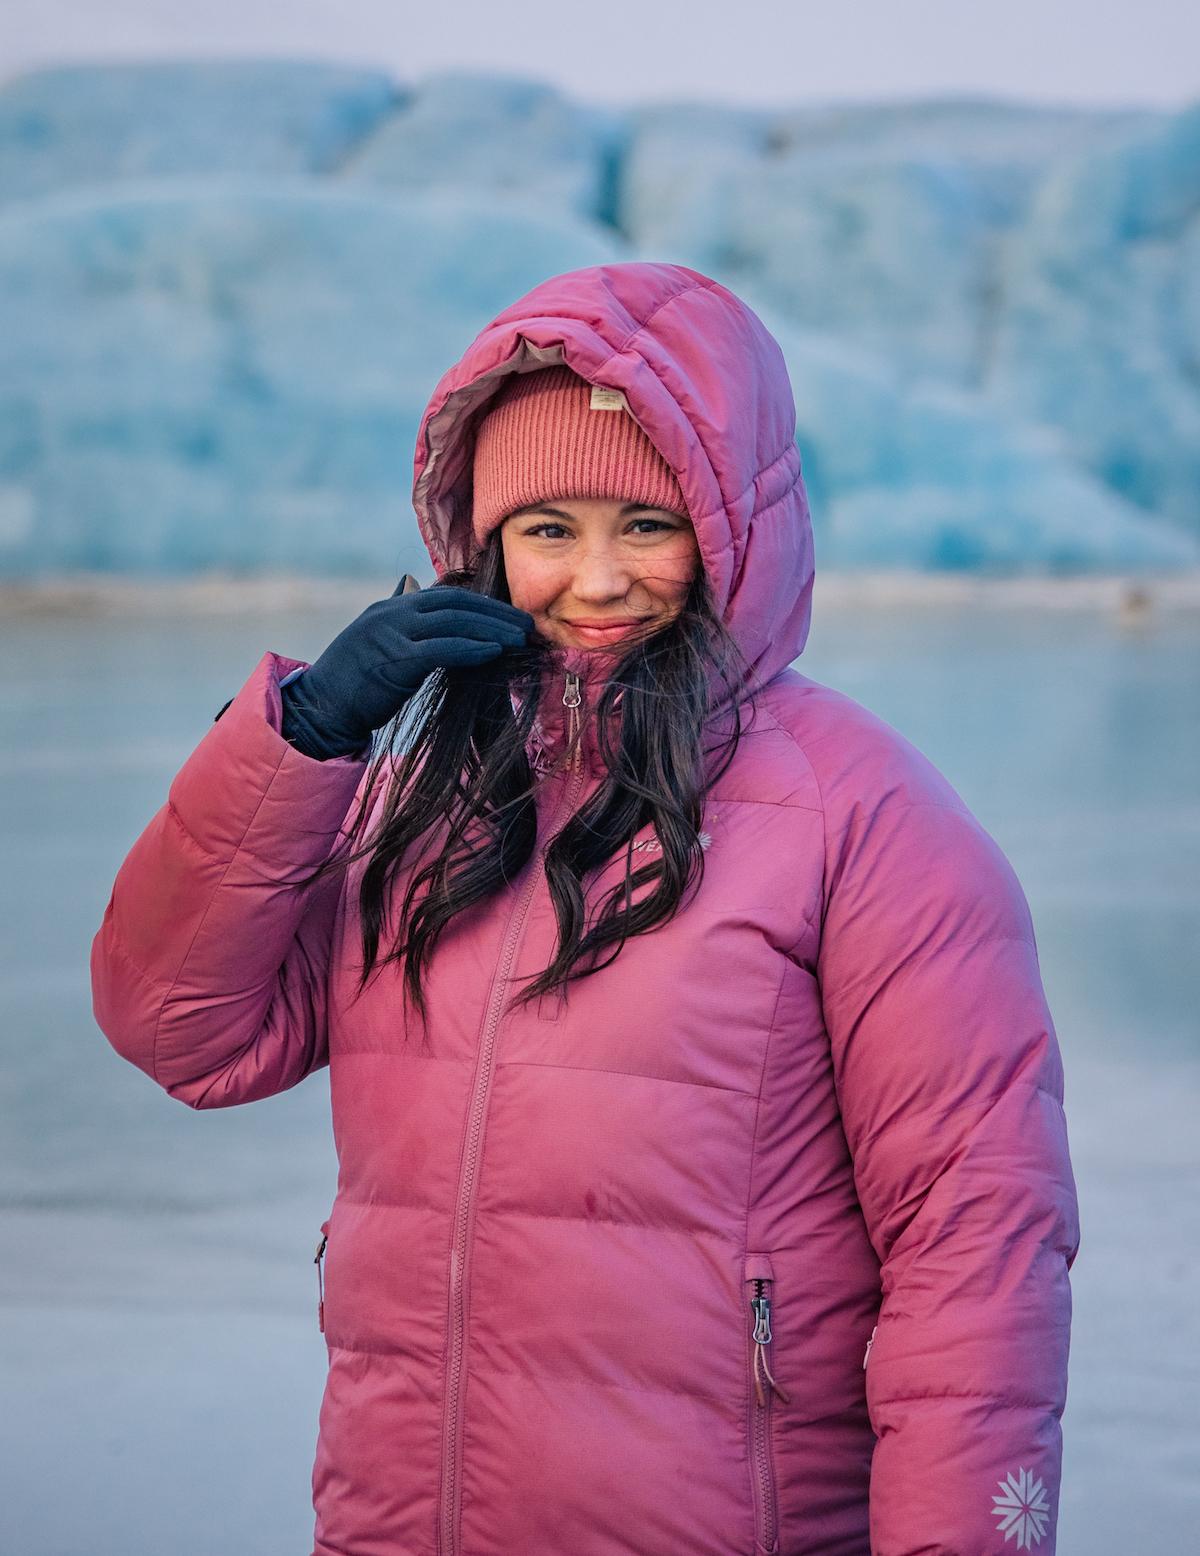 Kyana Sue Powers, a U.S. native who moved to Iceland in 2019 after falling in love with the country. (Courtesy of <a href="https://www.instagram.com/kyanasue/">Kyana Sue Powers</a>)